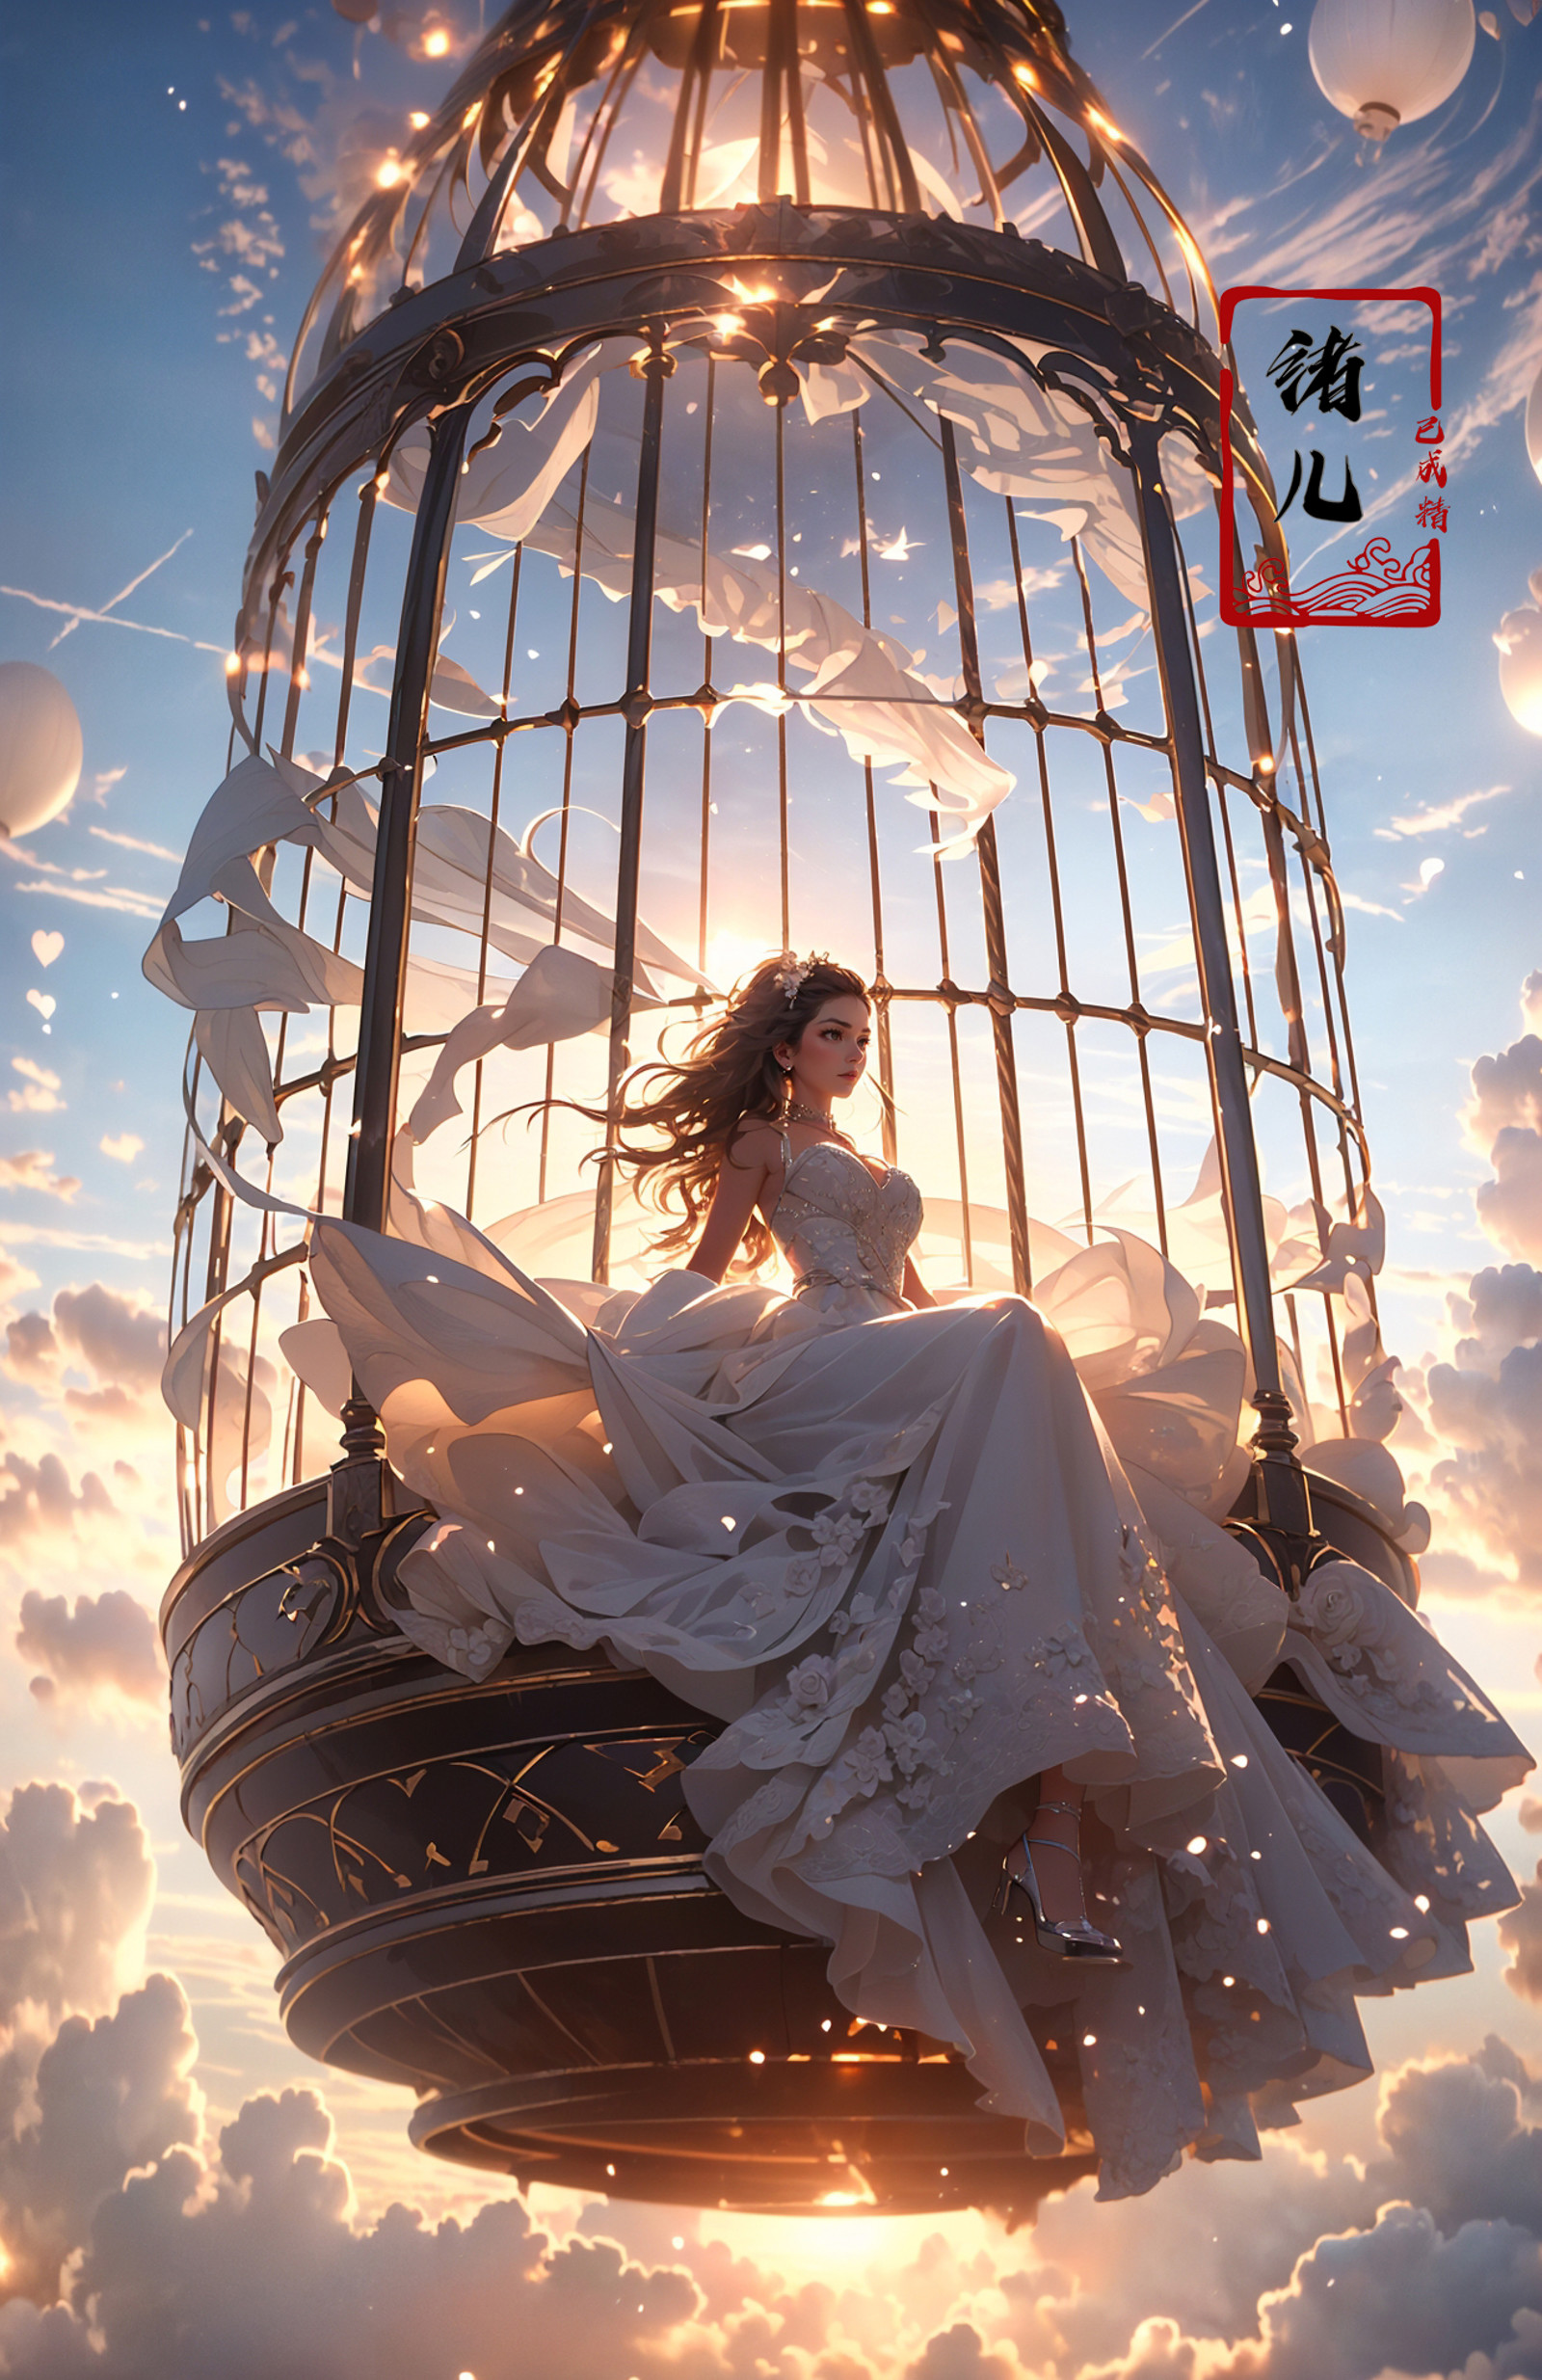 A beautiful woman with an angelic face on a hot air Huge birdcage, Huge birdcage drifts above above clouds, awed by the be...